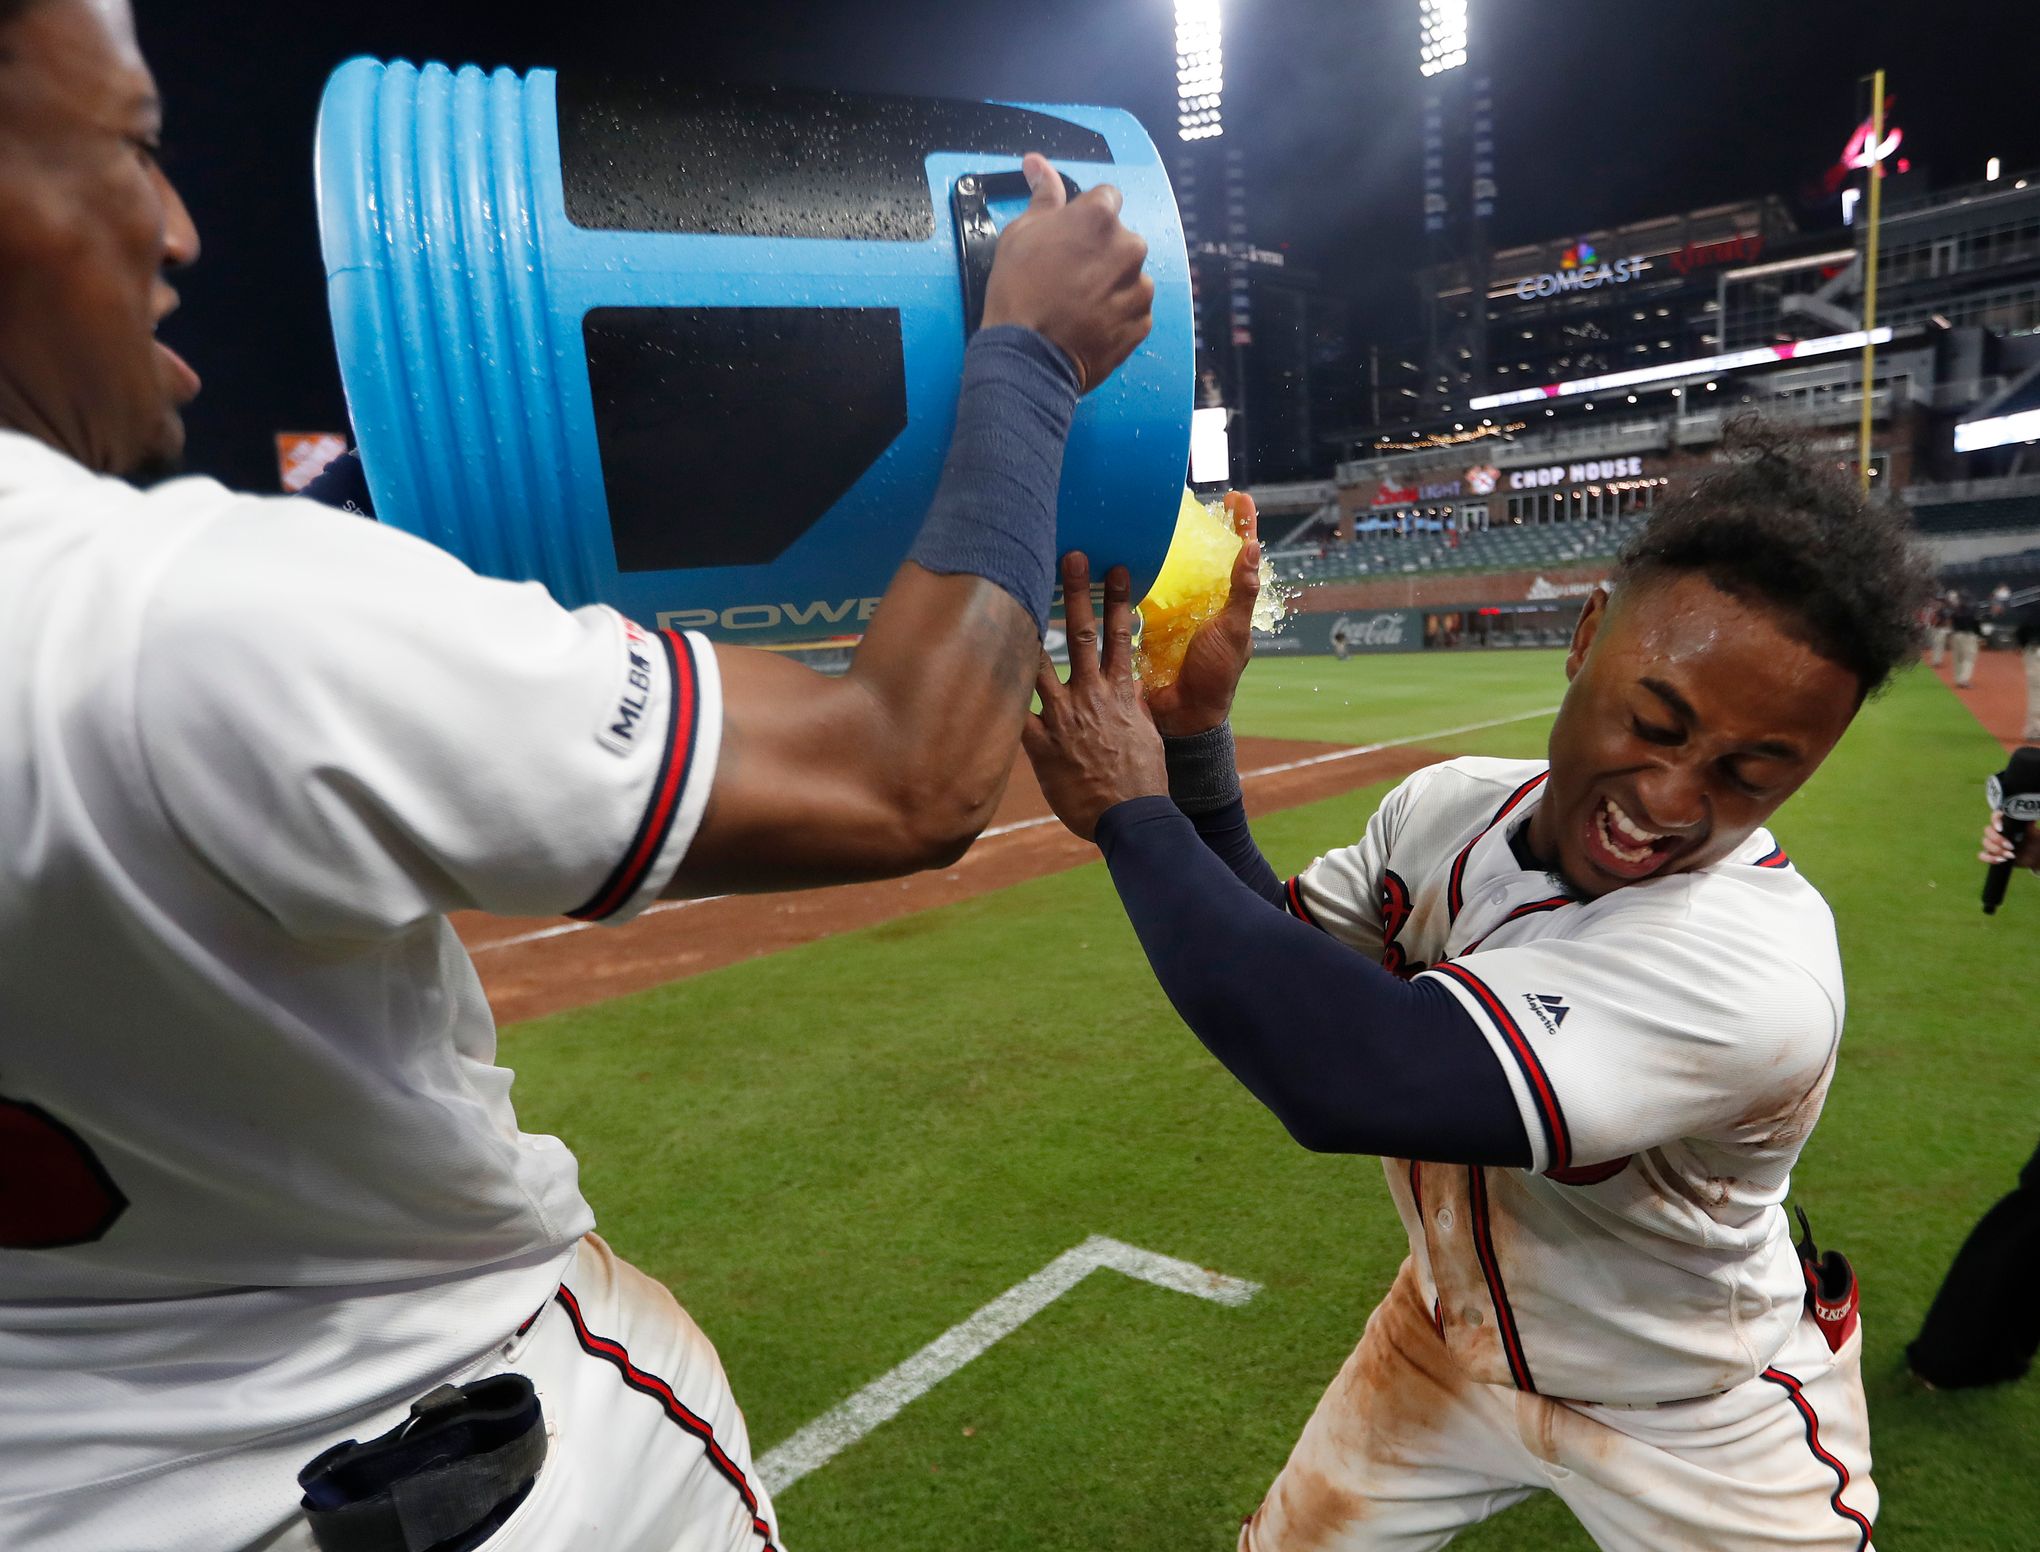 Riley HR ties it in 9th, Braves top Bucs in 11 for 6 in row